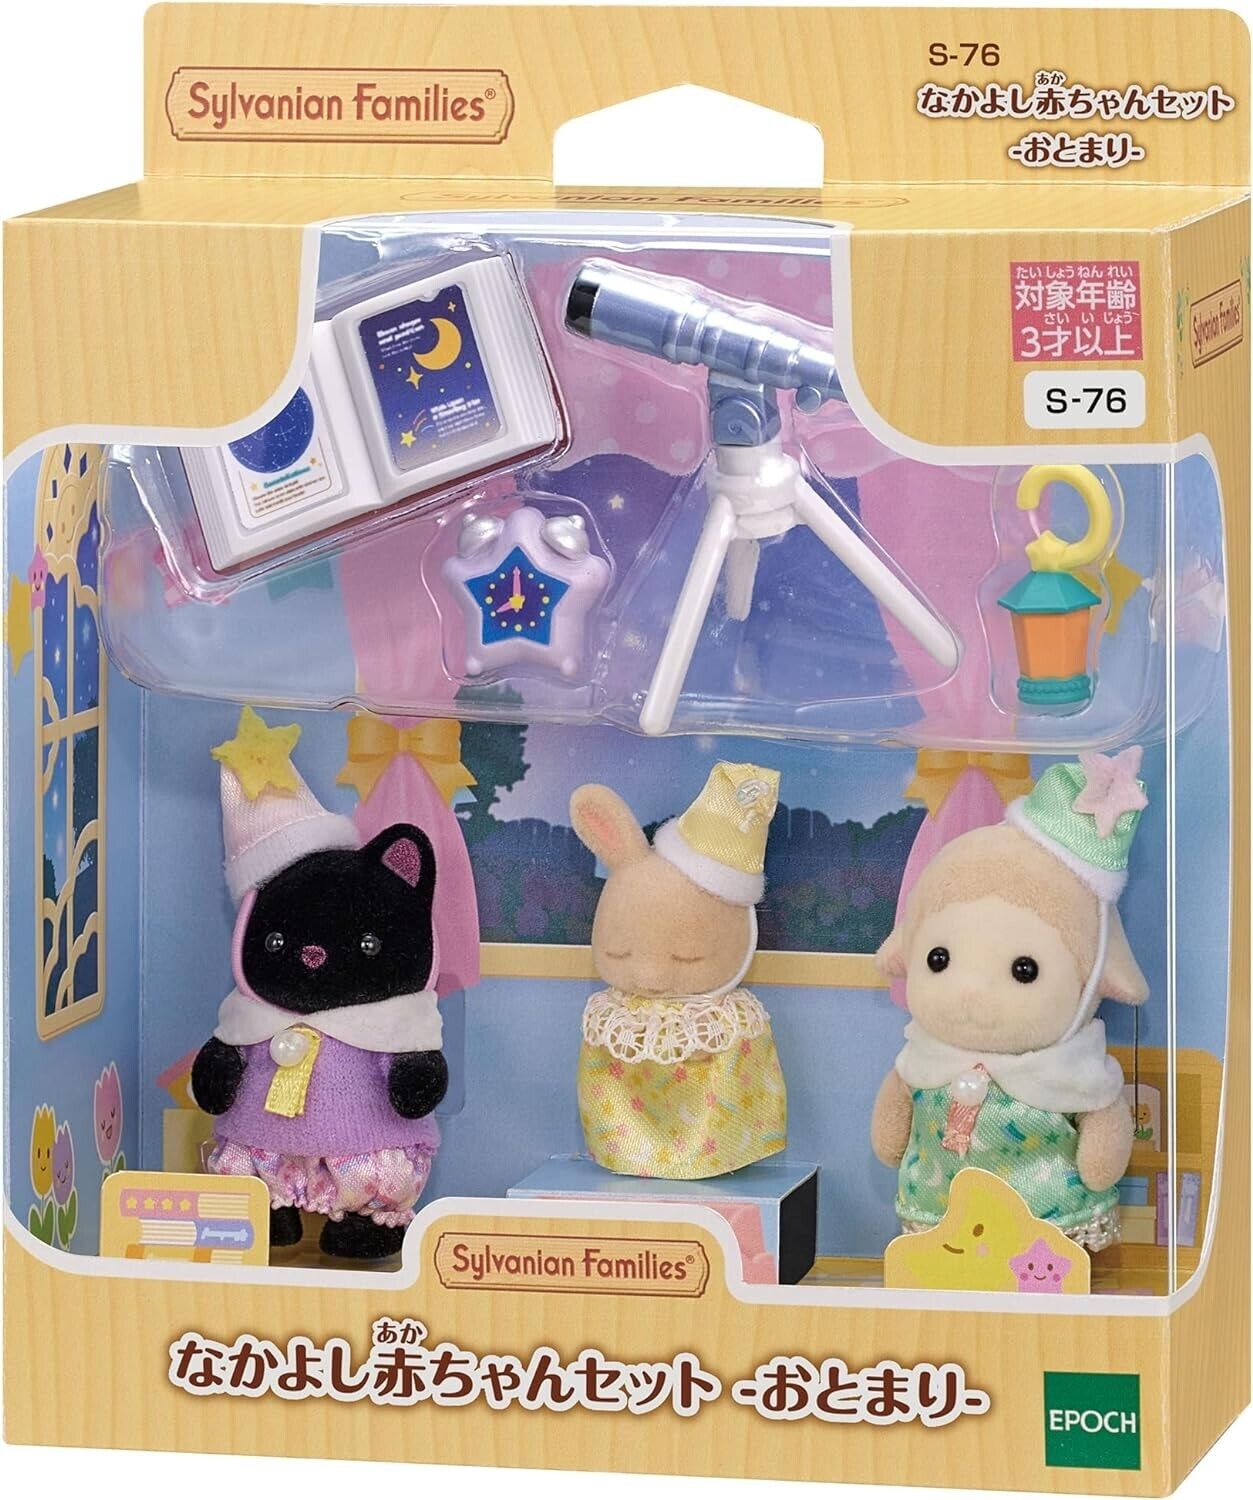 Sylvanian Families: Friends Baby Set Sleepover S-76, EPOCH, Calico Critters